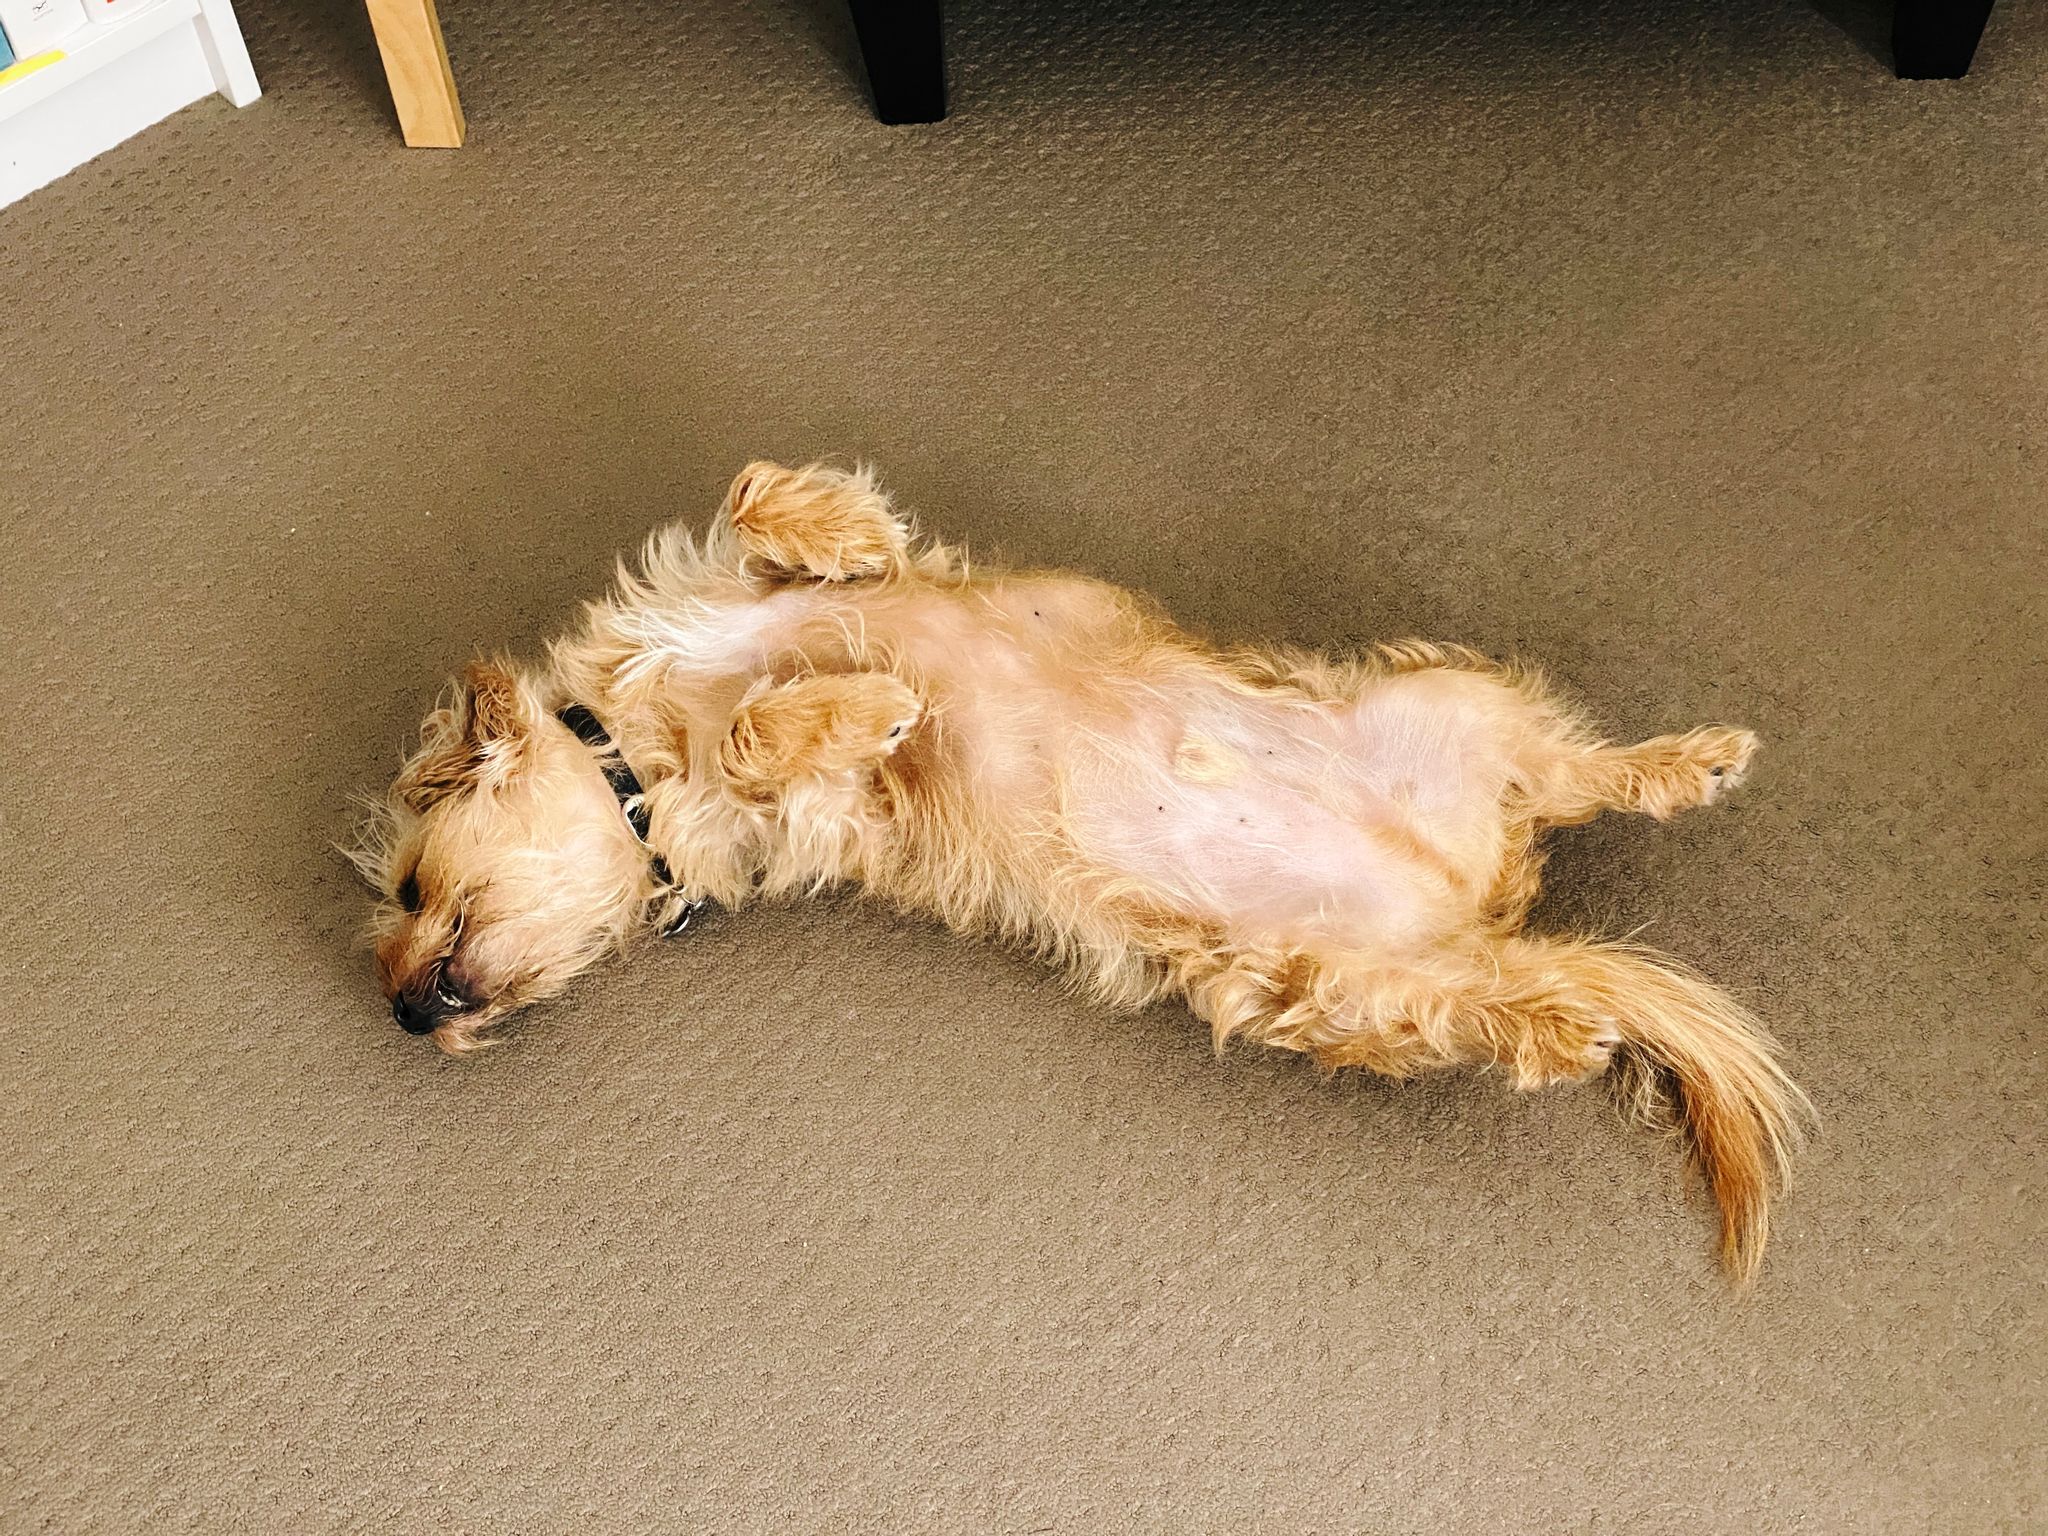 A photo of a small scruffy blonde dog lying upside-down with his legs in the air.